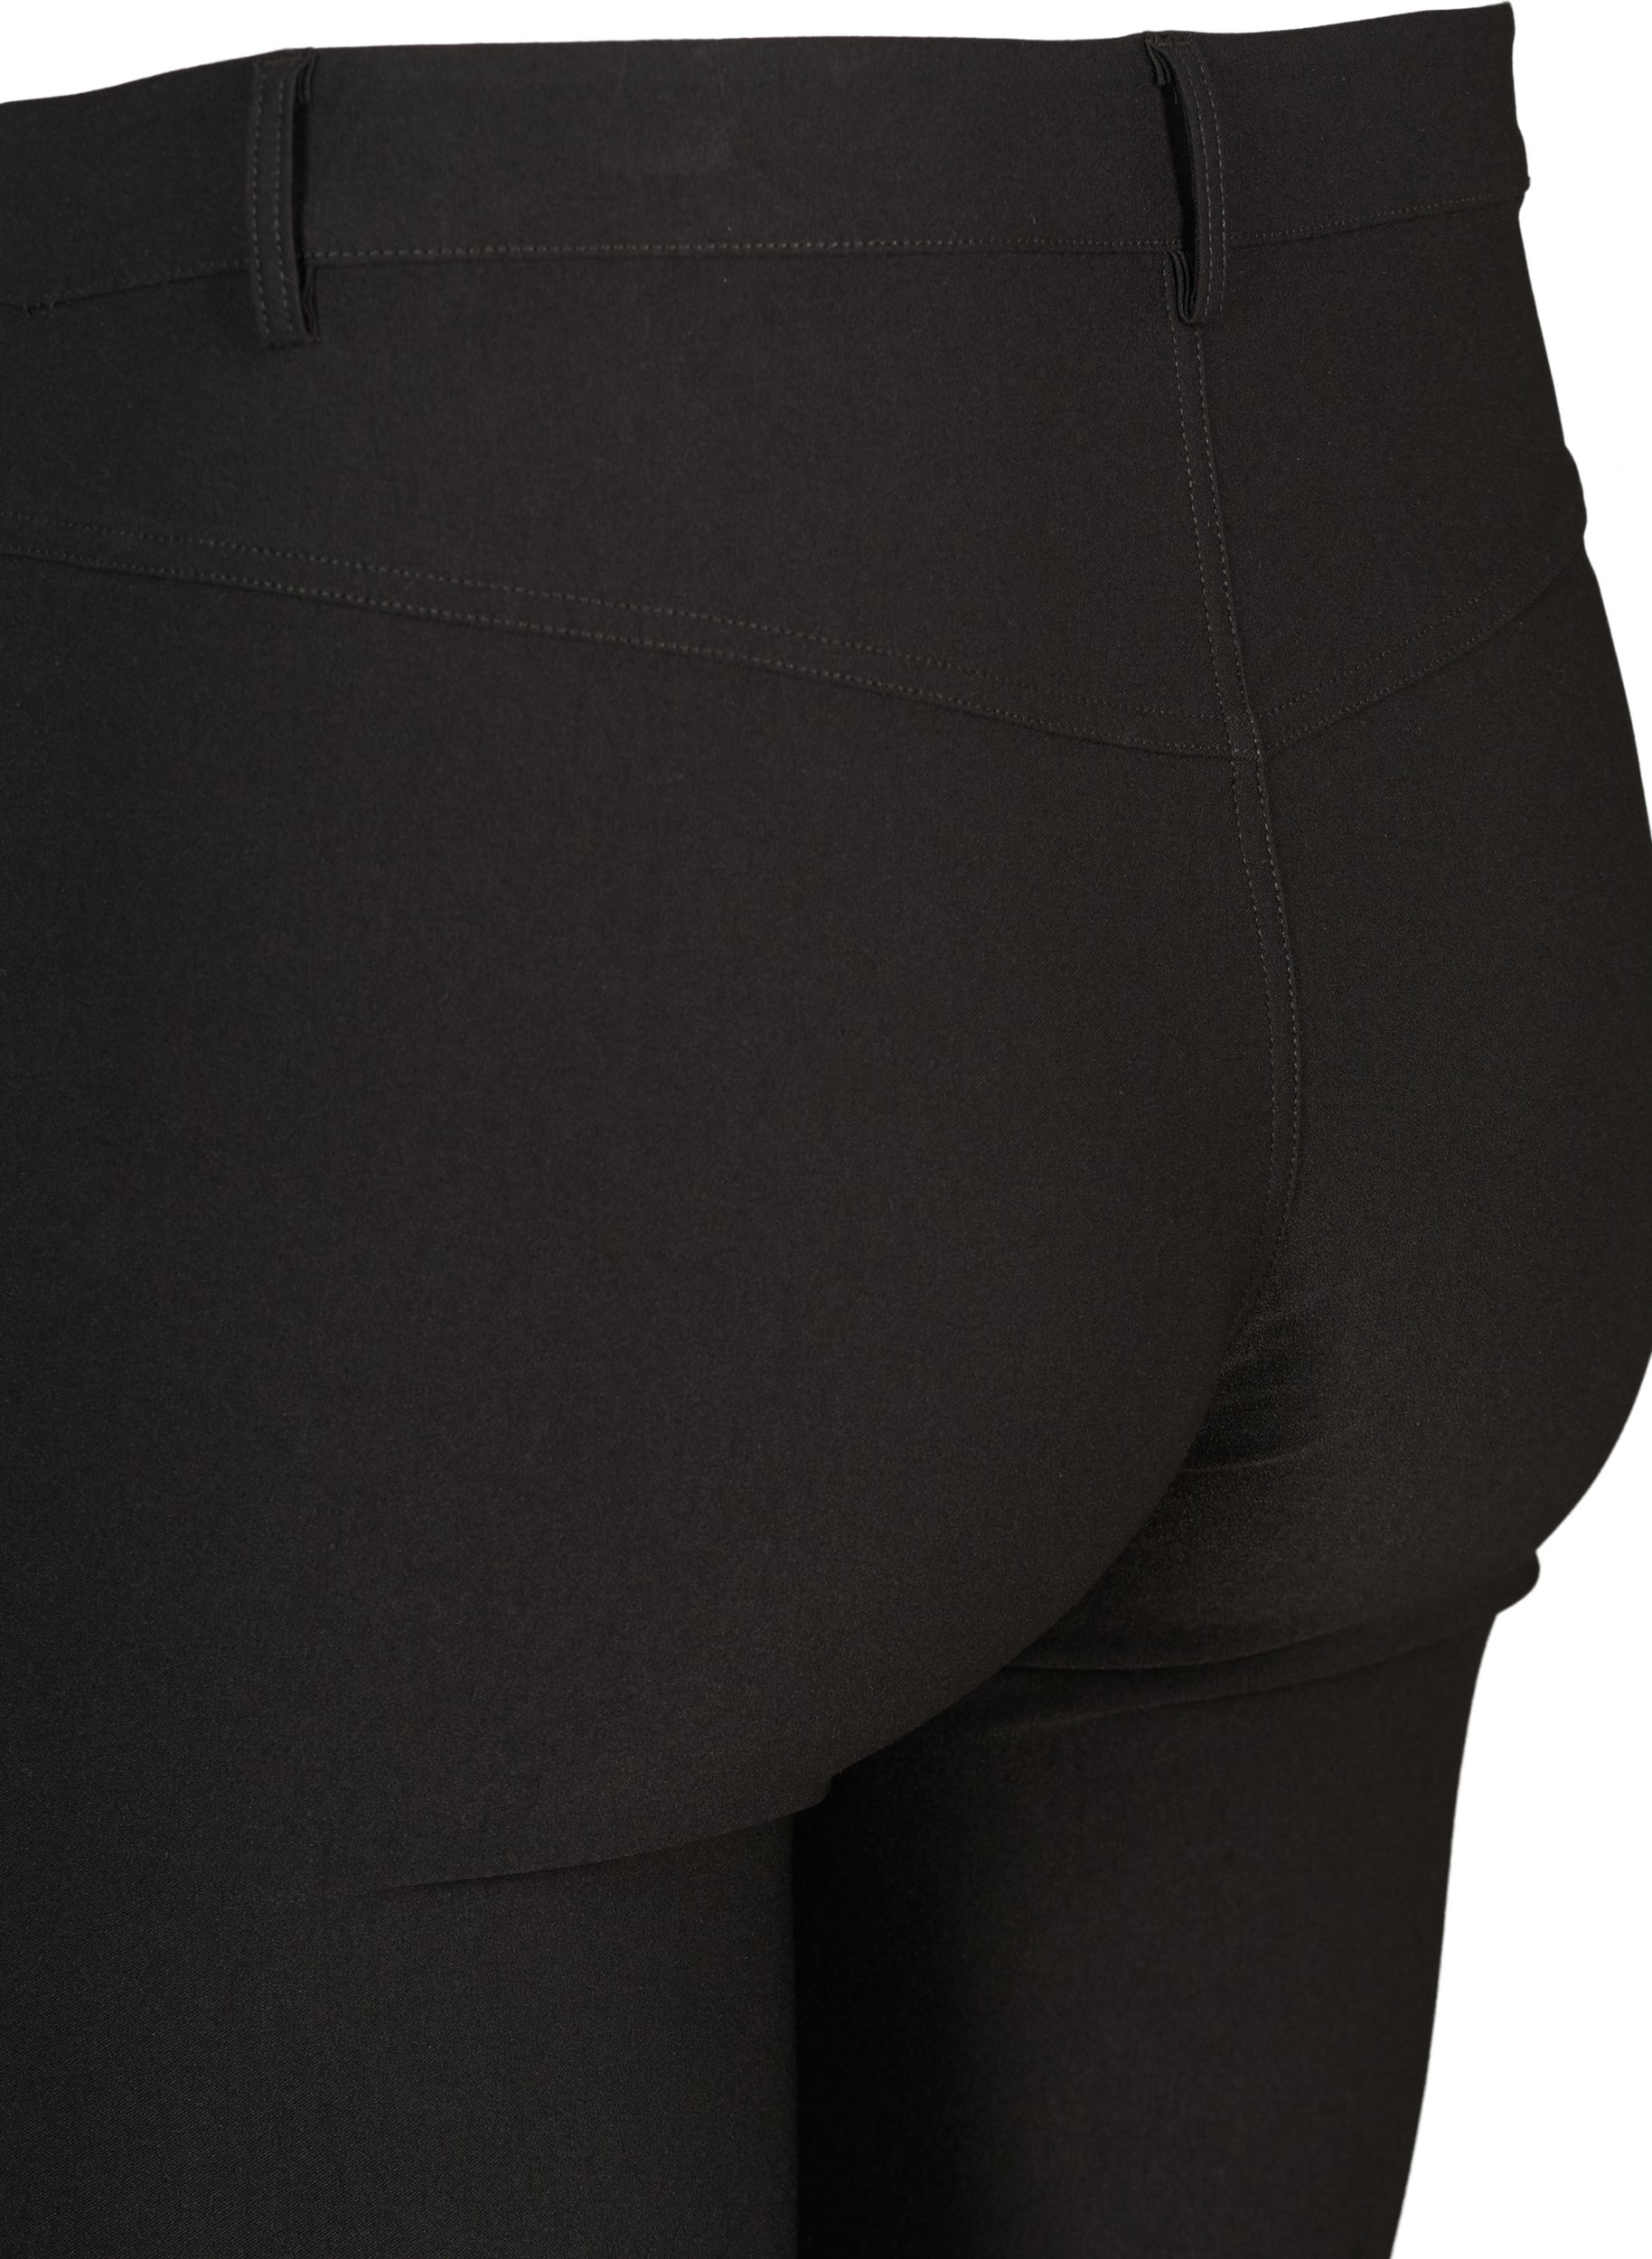 Close-fitting trousers with zipper details, Black, Packshot image number 3